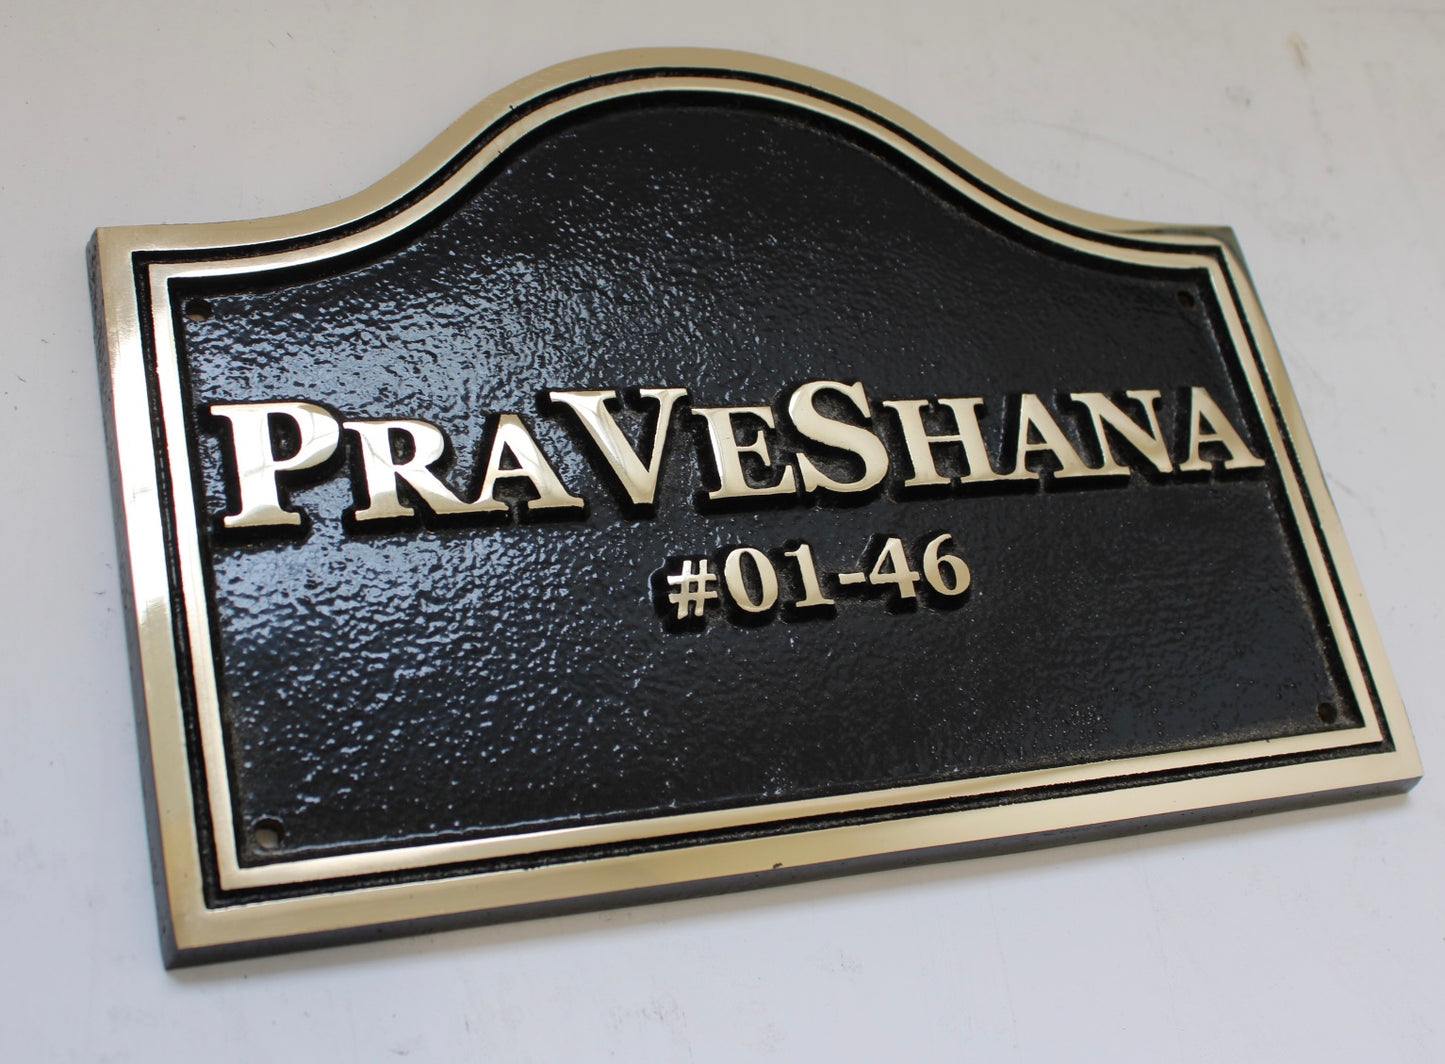 Bronze cast house sign with double border